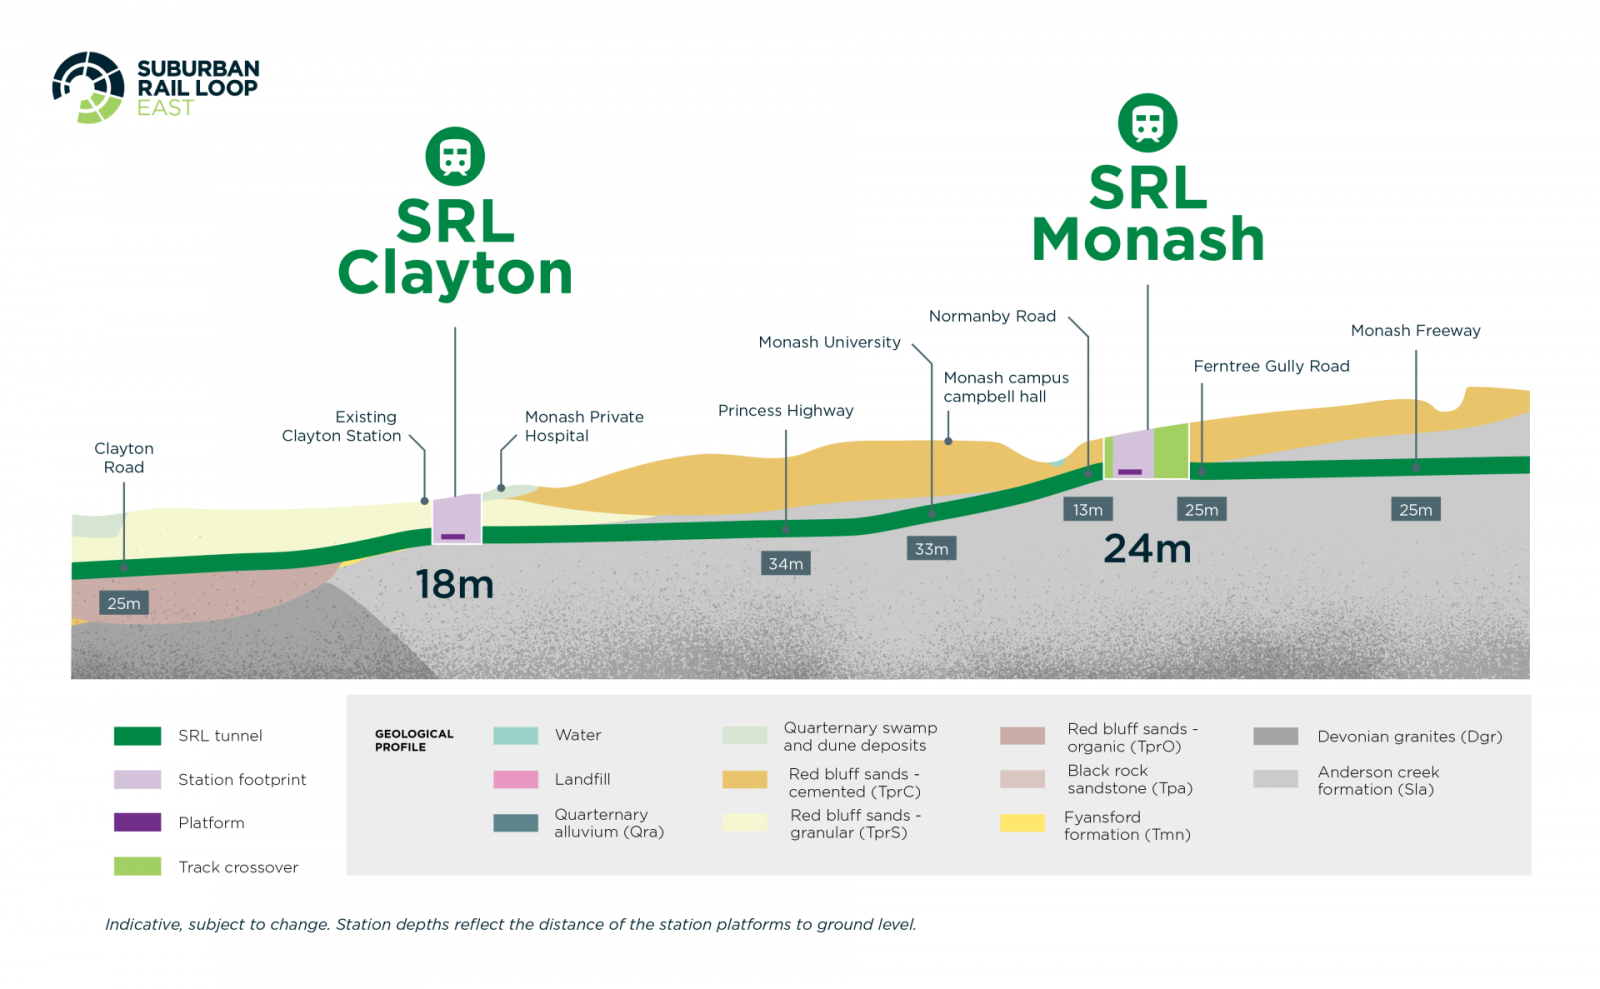 Diagram: The underground path of SRL East between Clayton and Monash. Depth is 25m, 18m, 34m, 33m, and 13m to 25m.